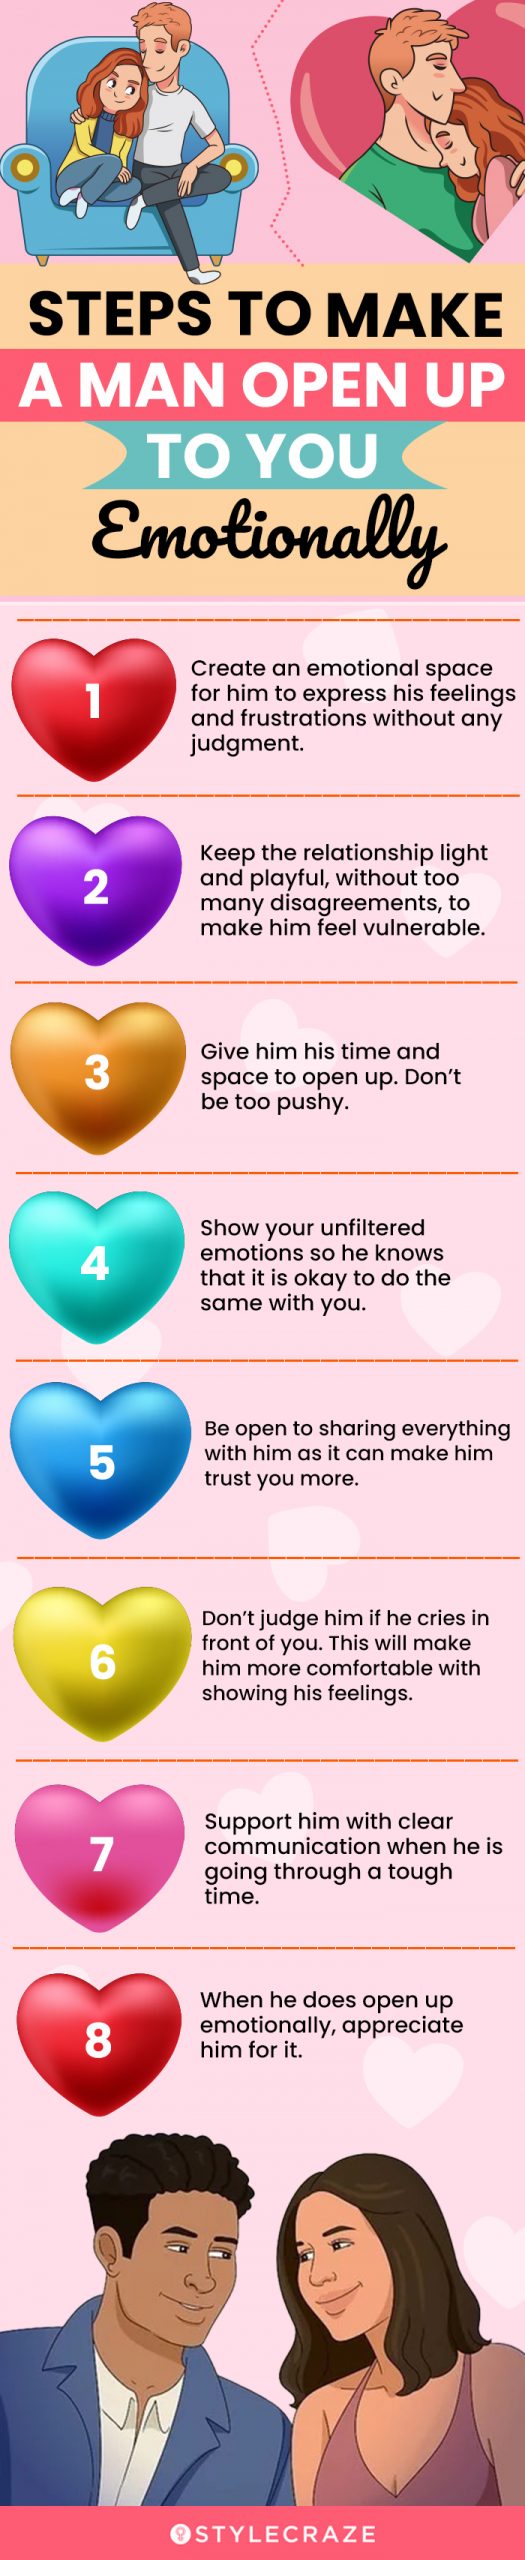 steps to make a man open up to you emotionally (infographic)